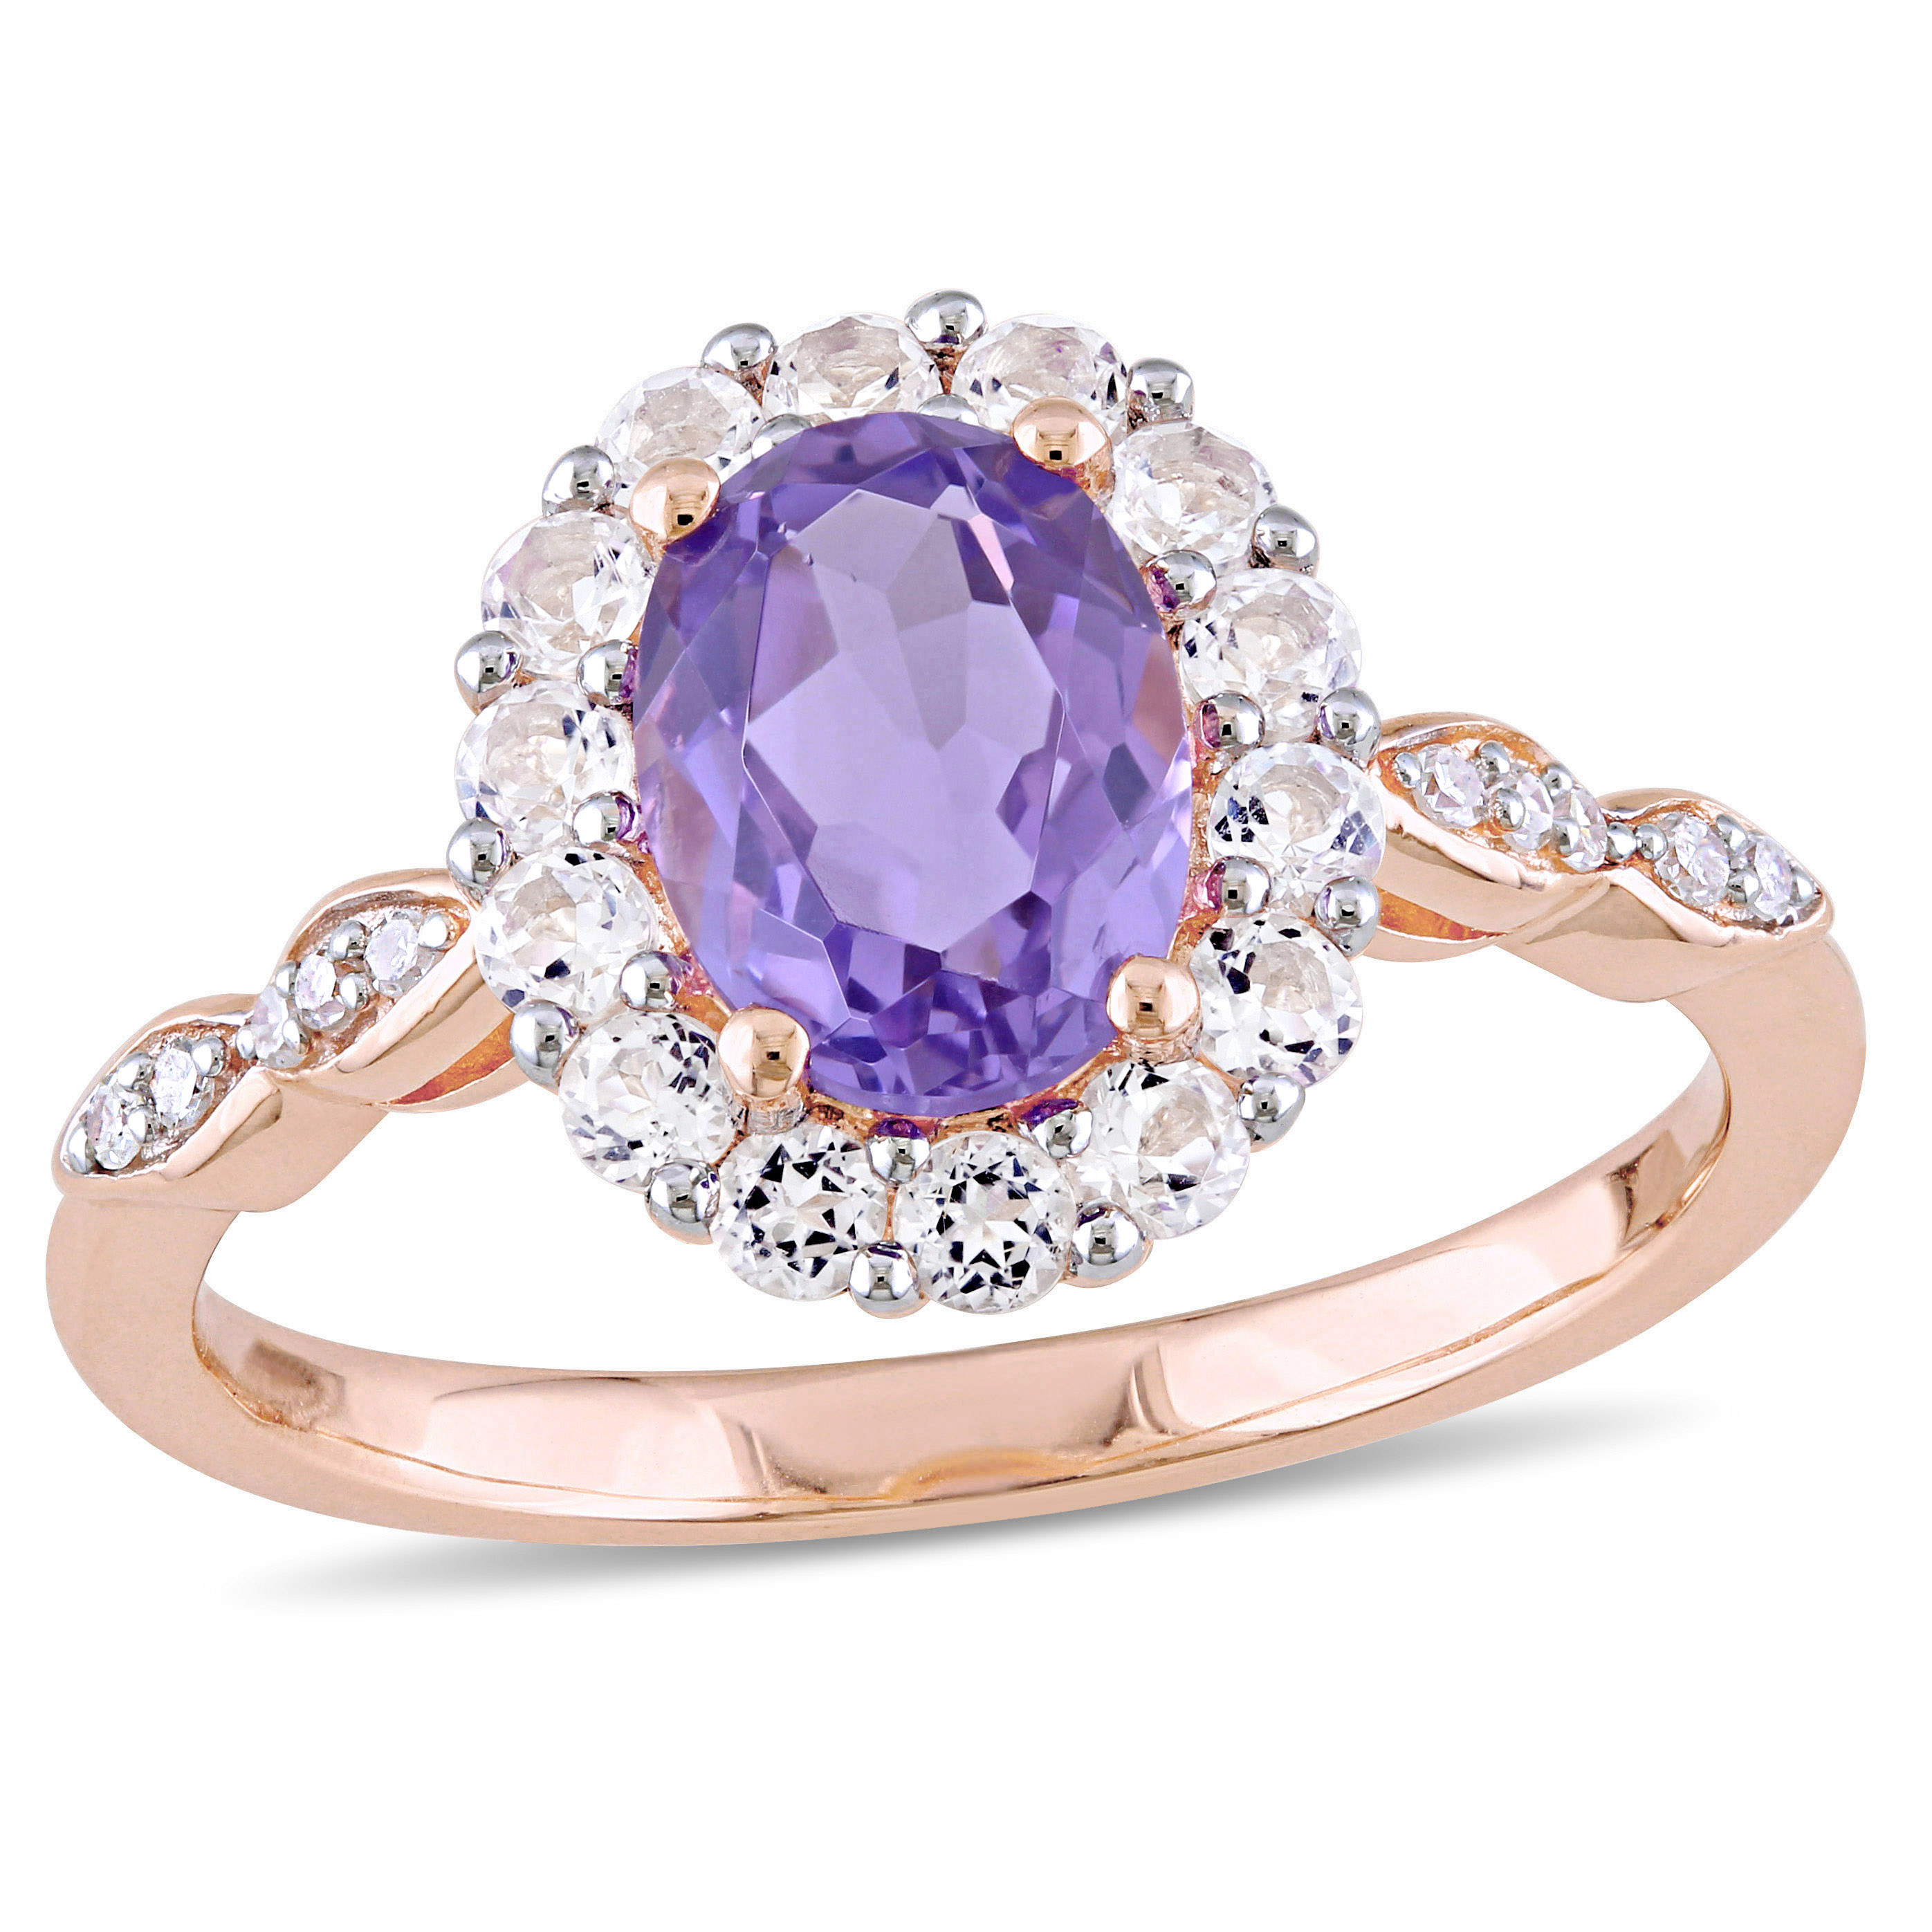 Oval Shape Amethyst, White Topaz and Diamond Accent Vintage Ring in 14k Rose Gold